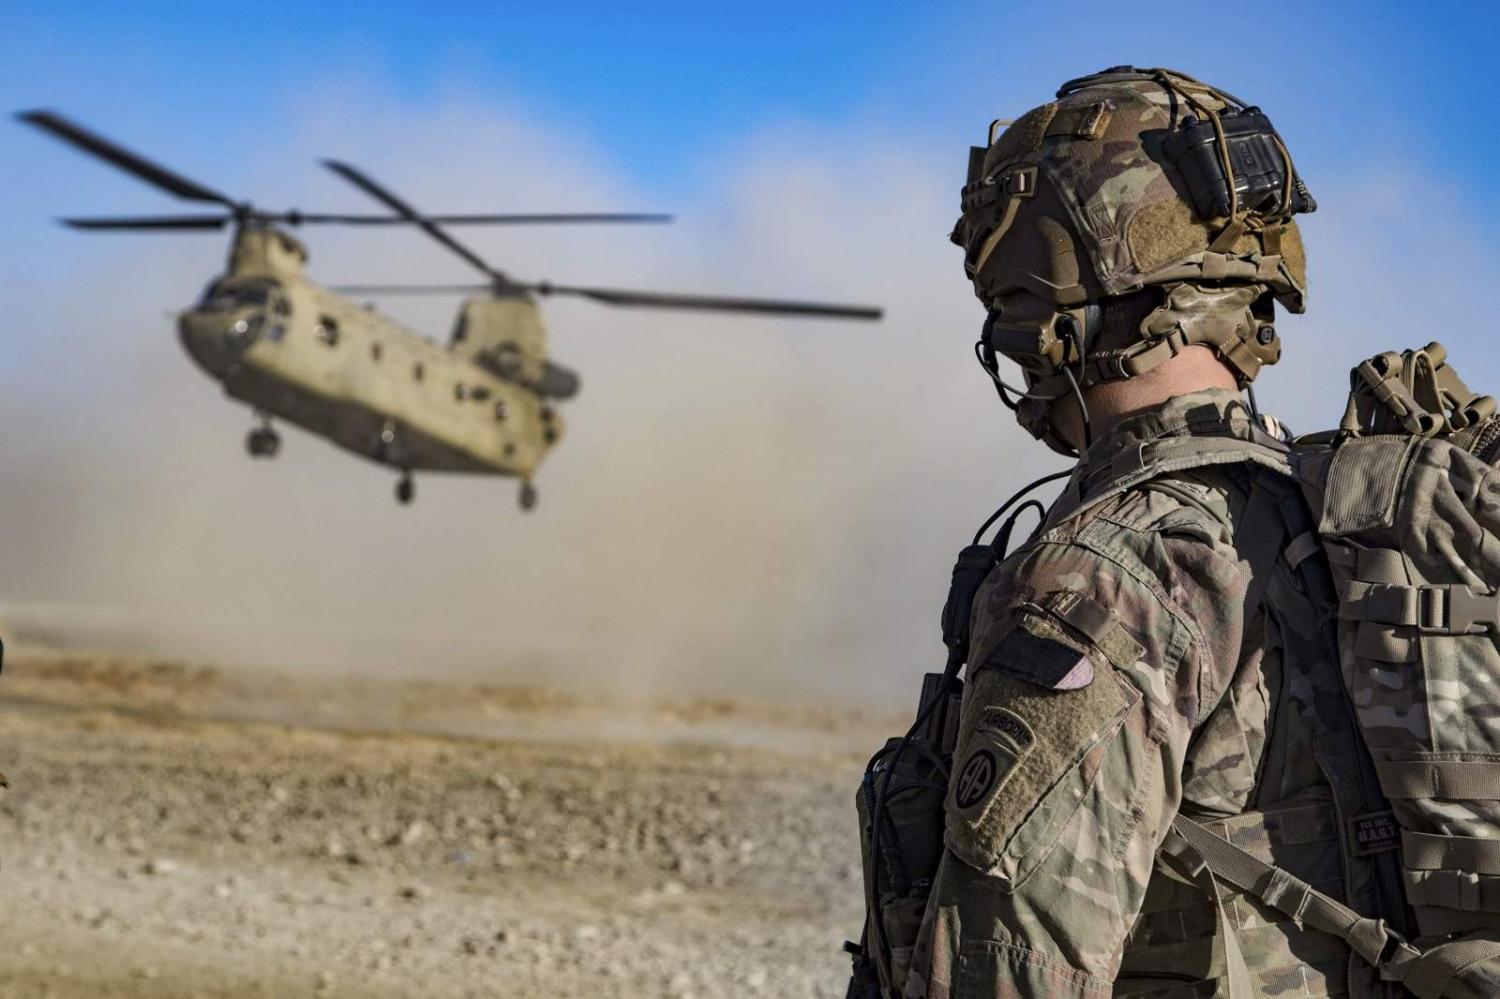 Biden views the costs of the war in Afghanistan as cumulative and has long advocated for a policy that would bring closure. A chinook lands in southeastern Afghanistan, Dec 2019 (Army Master Sgt Alejandro Licea/US Dept of Defense)